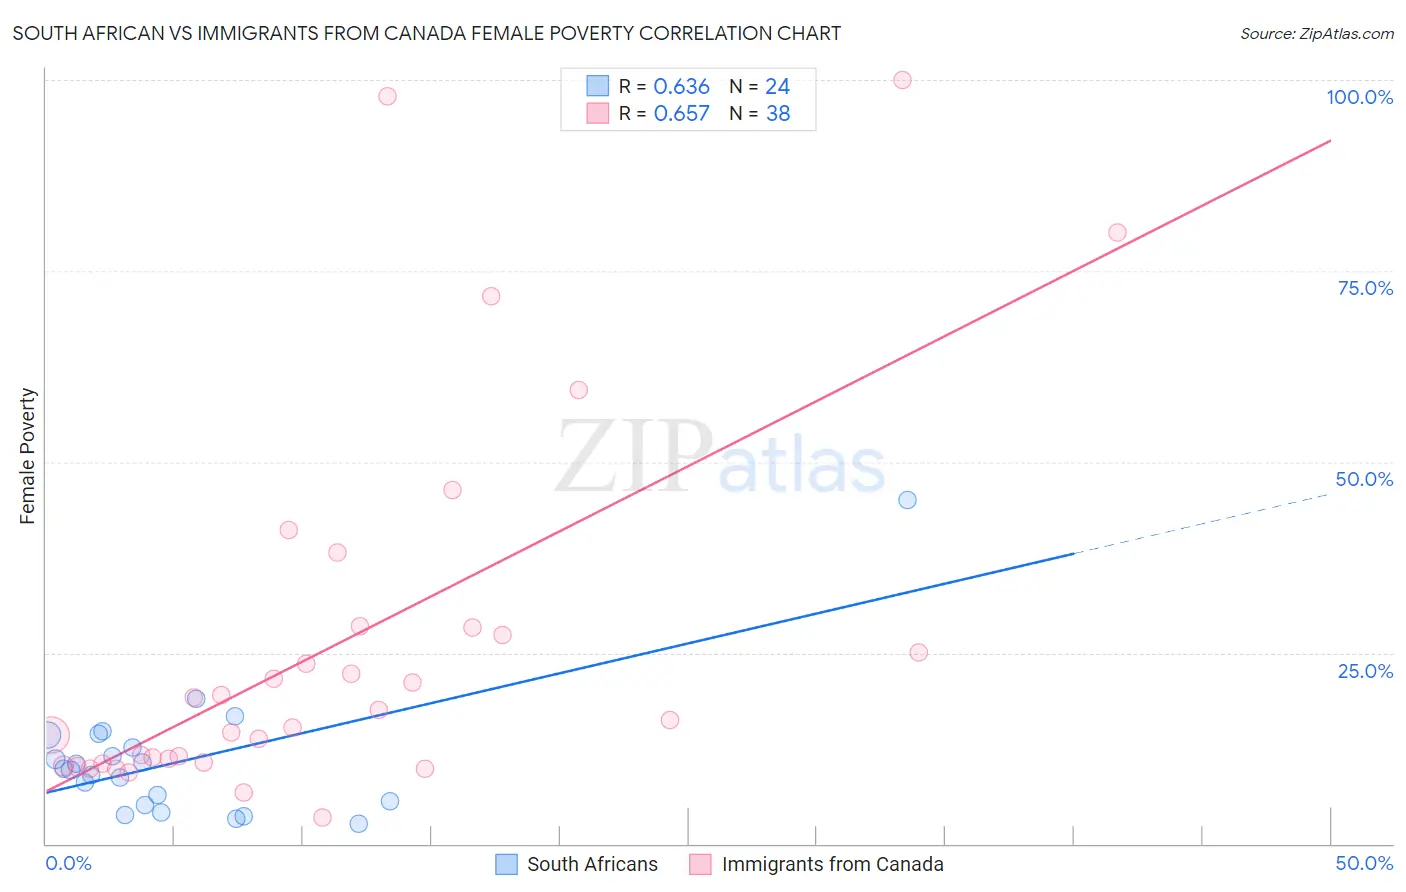 South African vs Immigrants from Canada Female Poverty